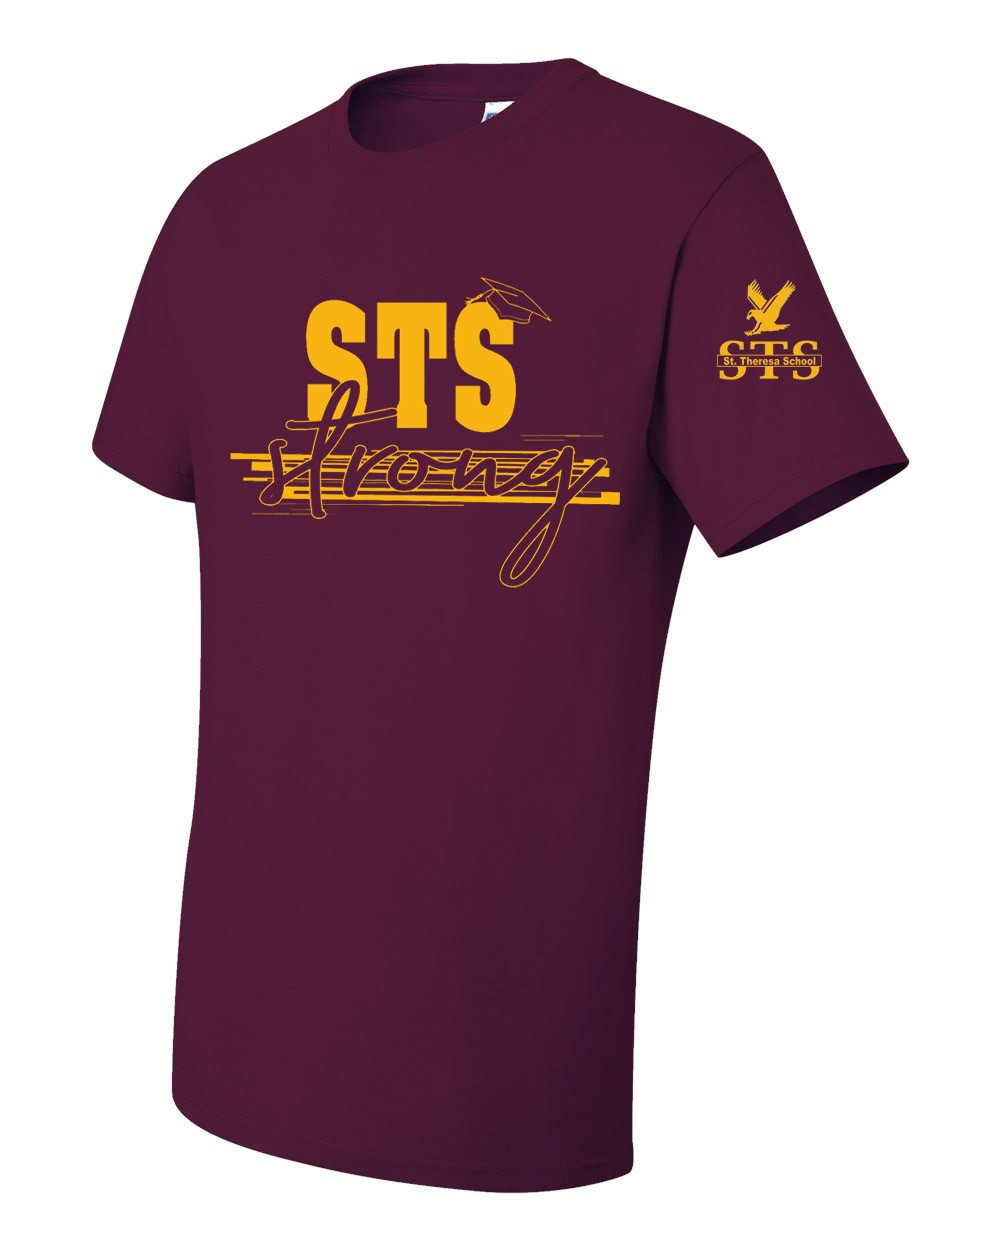 STS S/S Strong Spirit T-Shirt w/ Gold Logo - Please Allow 2-3 Weeks for Delivery